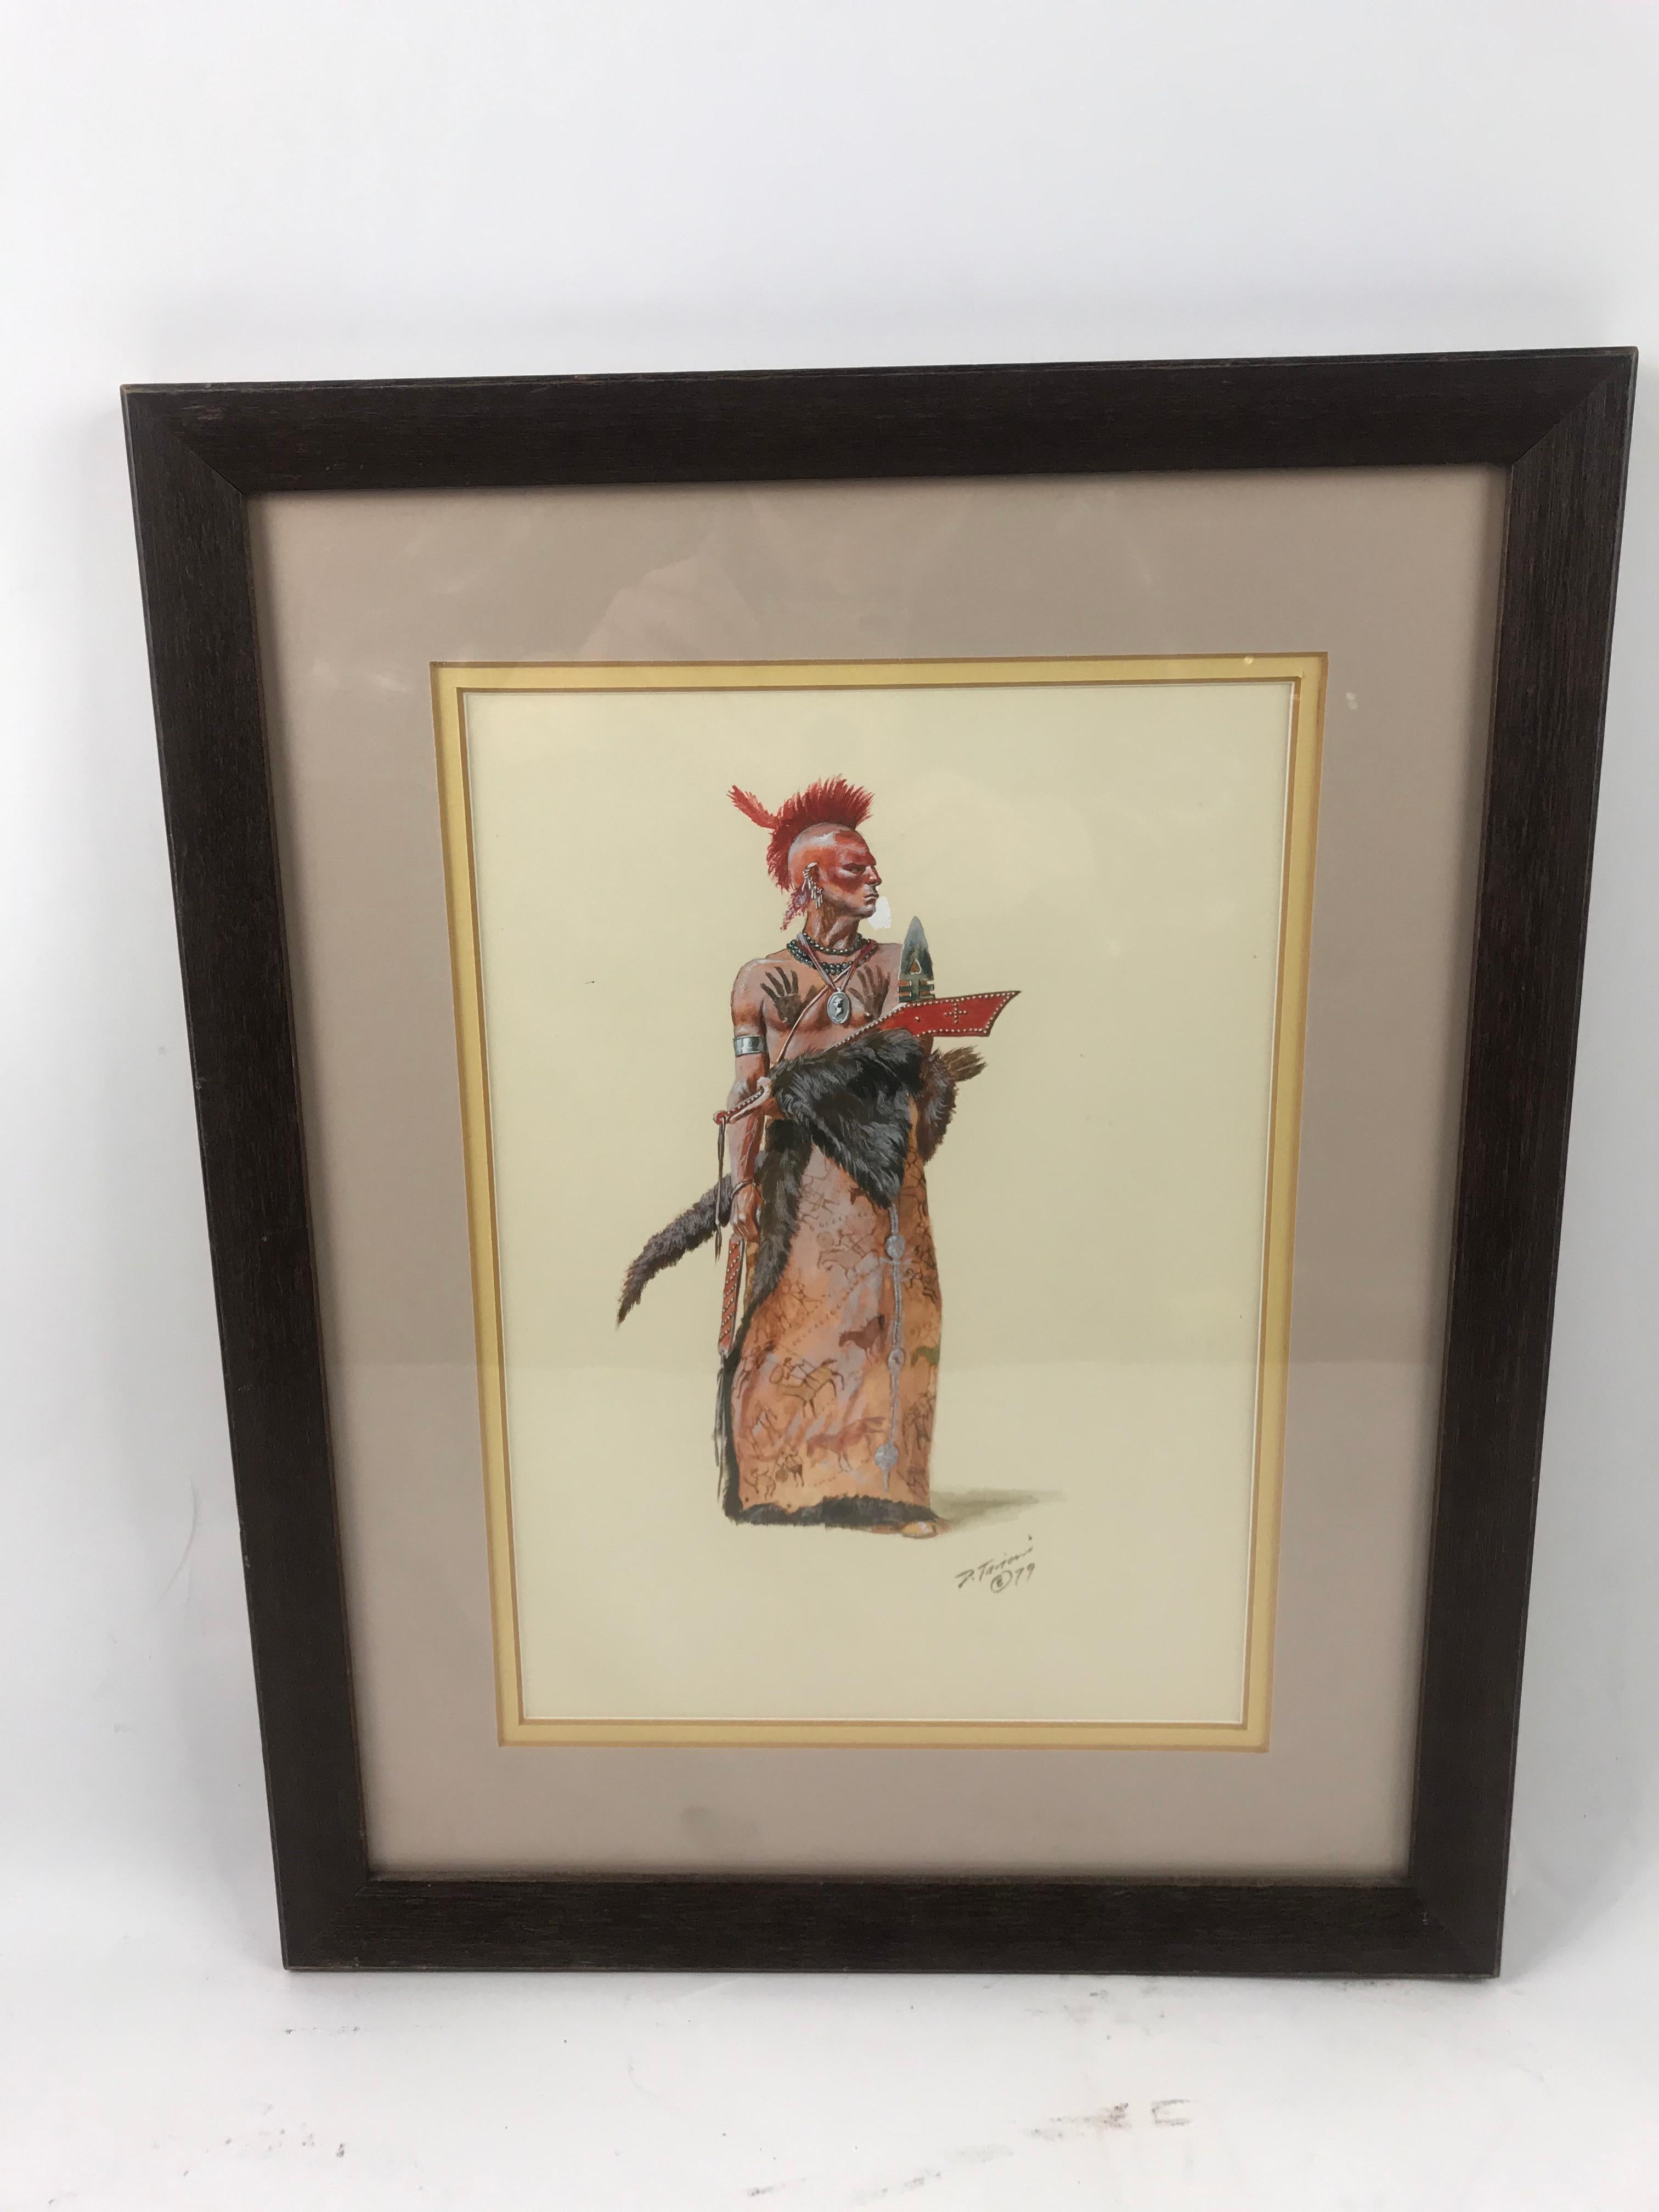 Don Troiani: American painter whose work focuses on his native country's military heritage, mostly from the American Revolution, War of 1812 and American Civil War.

A magnificent watercolor and gouache painting by Don Troiani, depicting a Pawnee